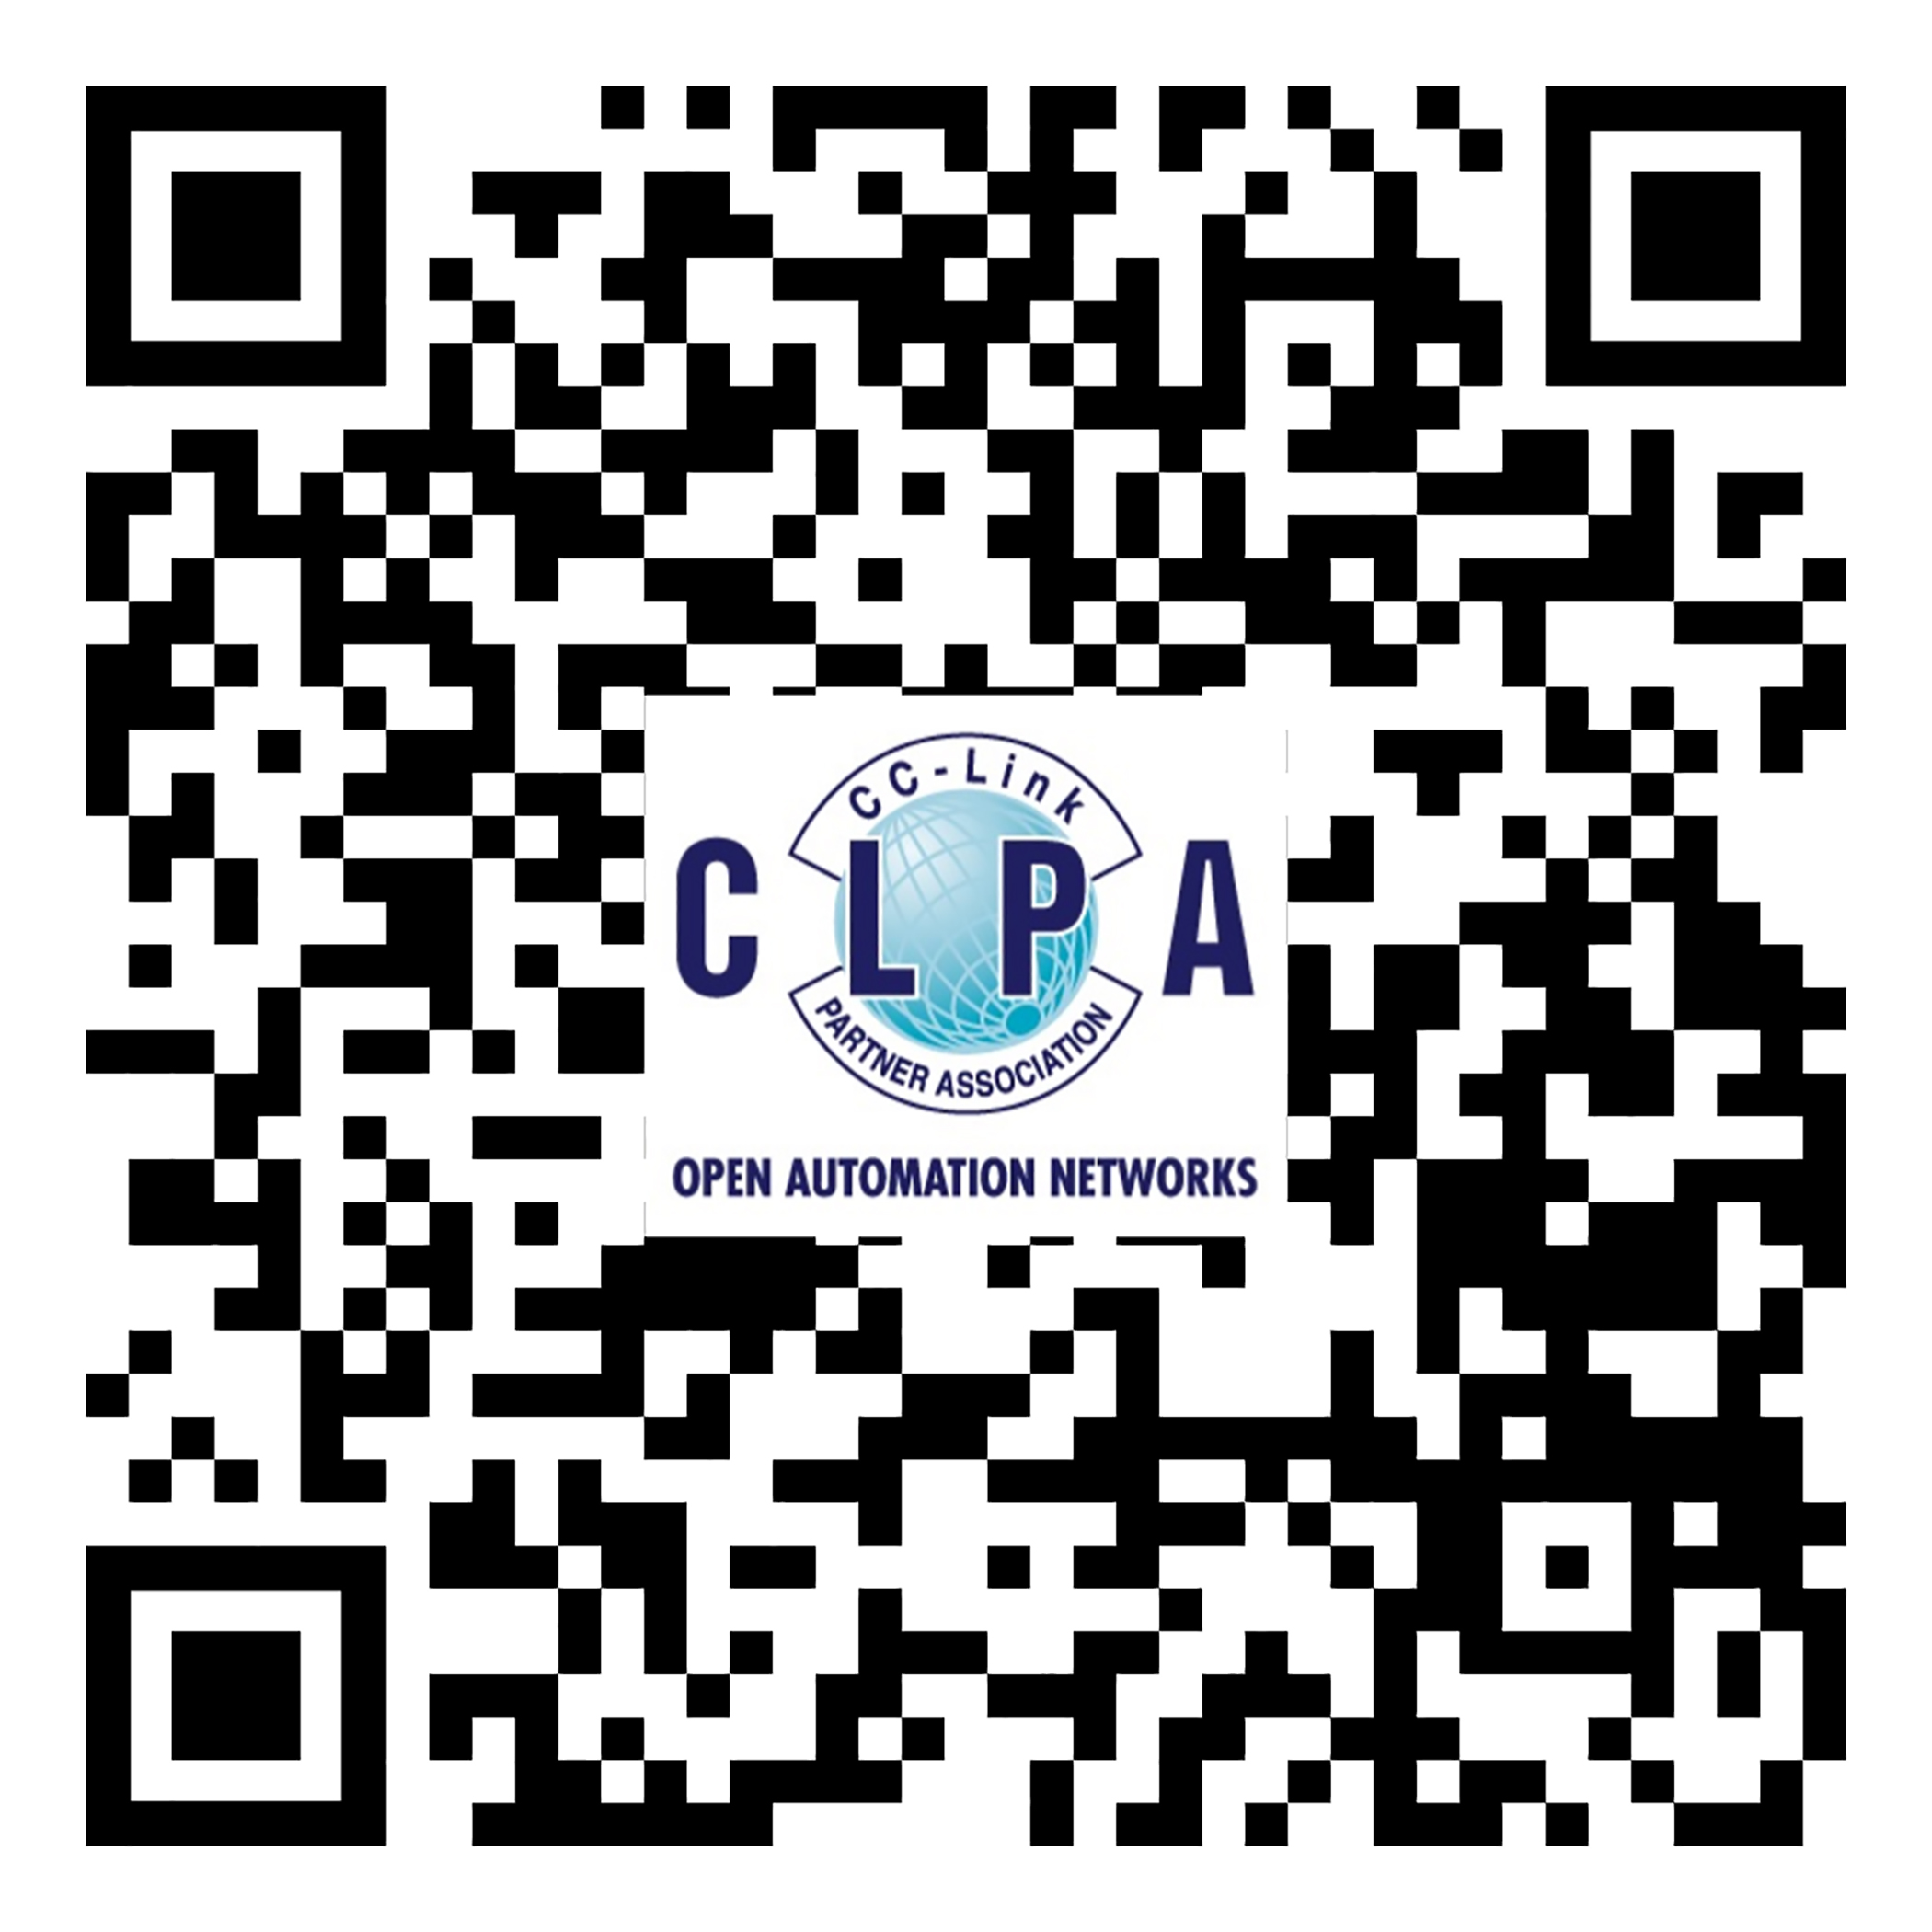 Scan the code to download a free copy of the CLPA’s latest white paper “Time-Sensitive Networking – The Case for Action now”.